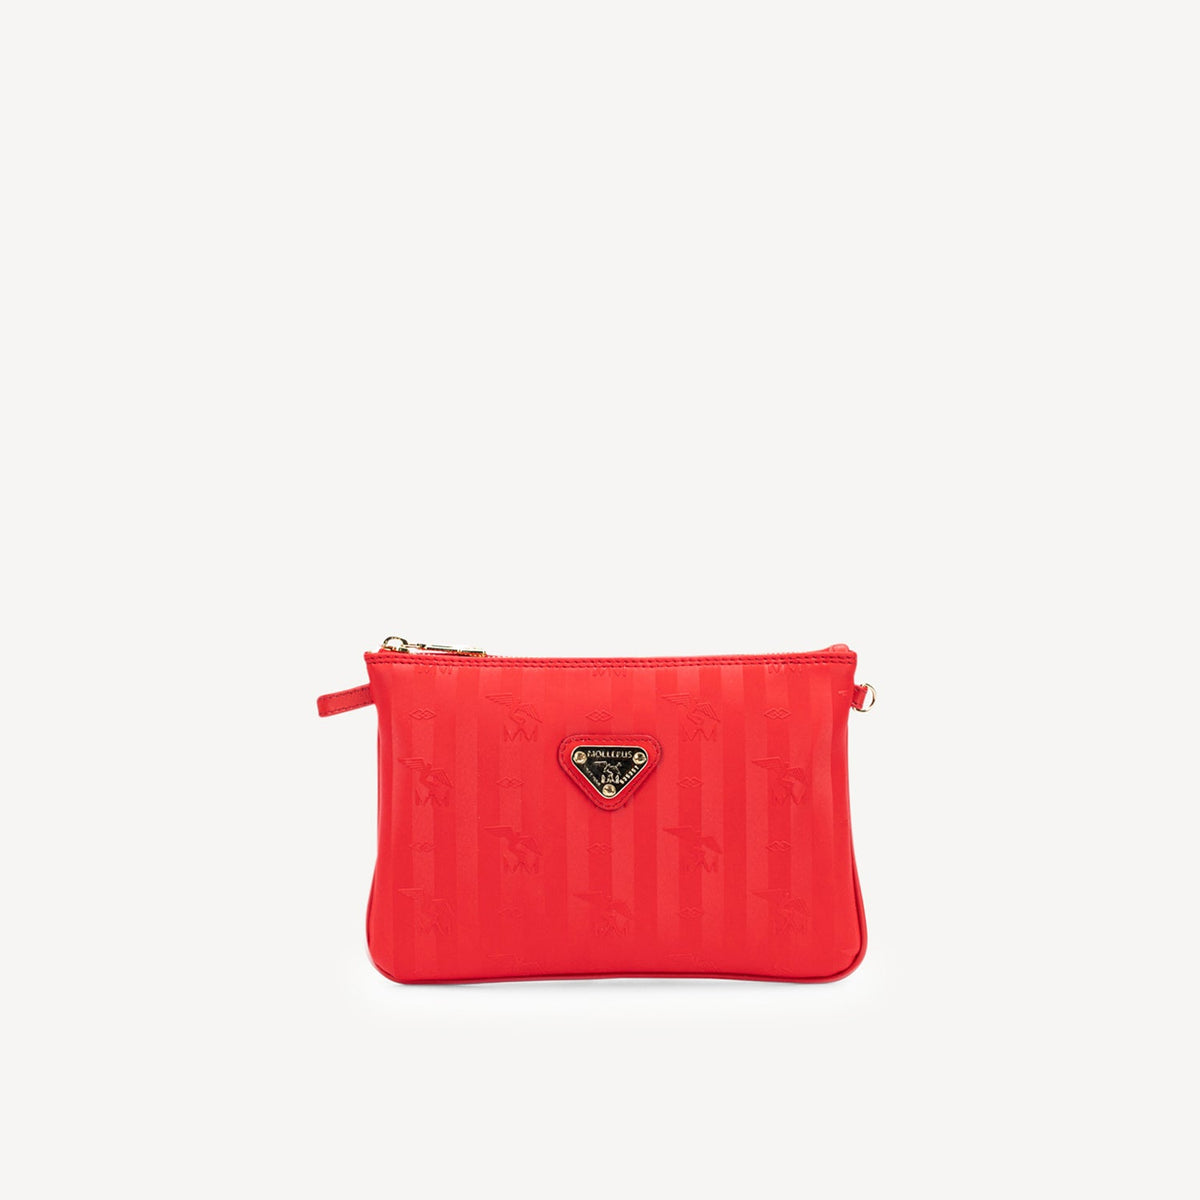 TAMINS | Shoulderbag cherry red/gold